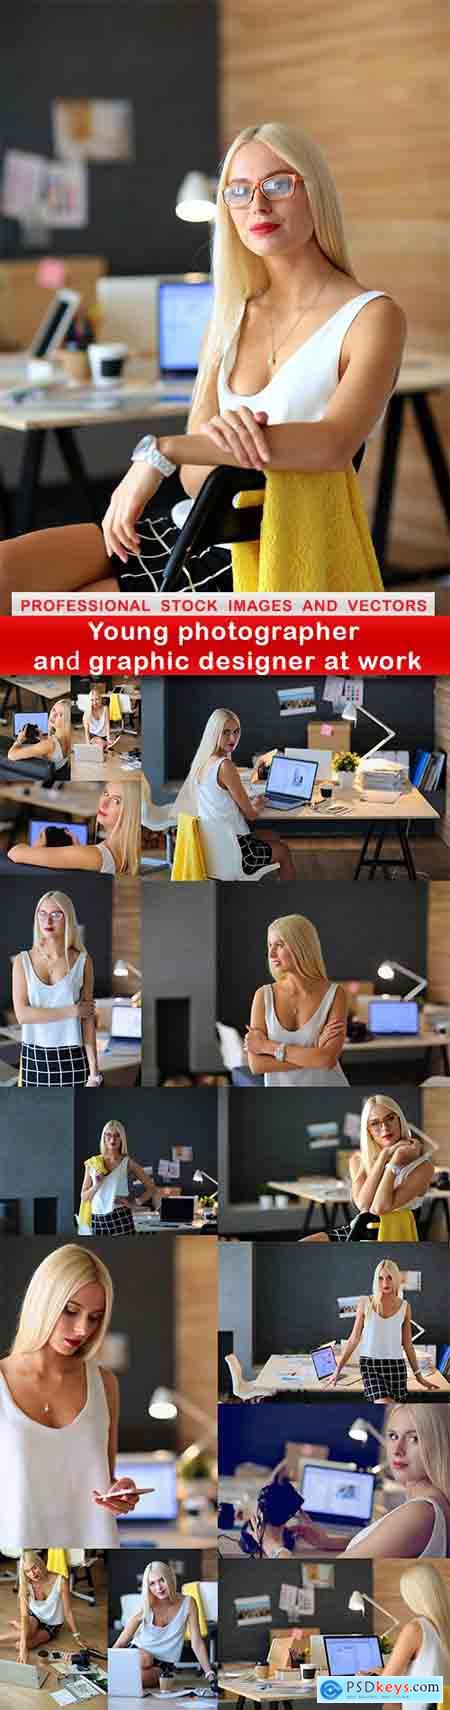 Young photographer and graphic designer at work - 15 UHQ JPEG